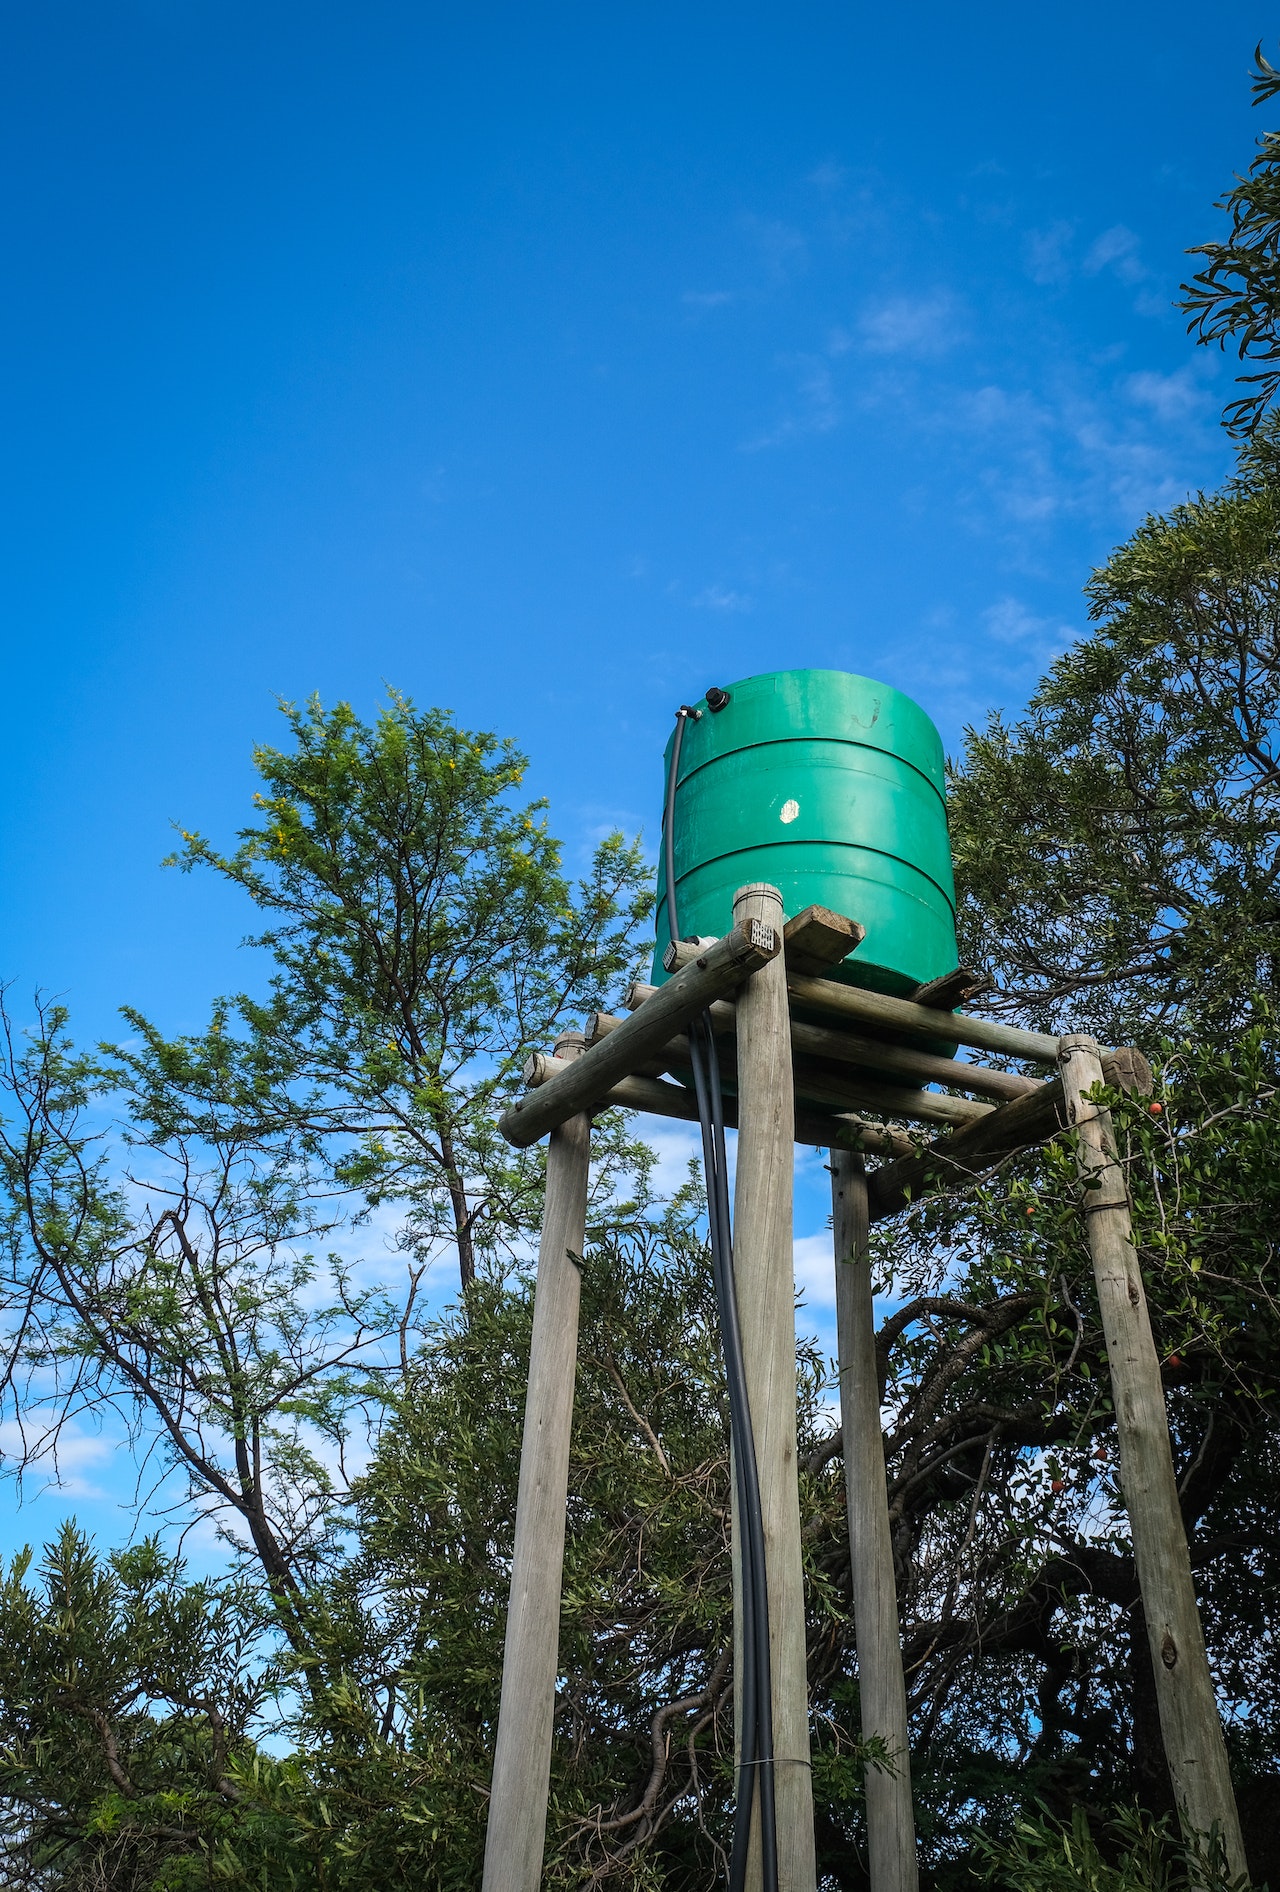 Top 5 Reasons Why You Should Hire a Professional to Install Your Water Tank